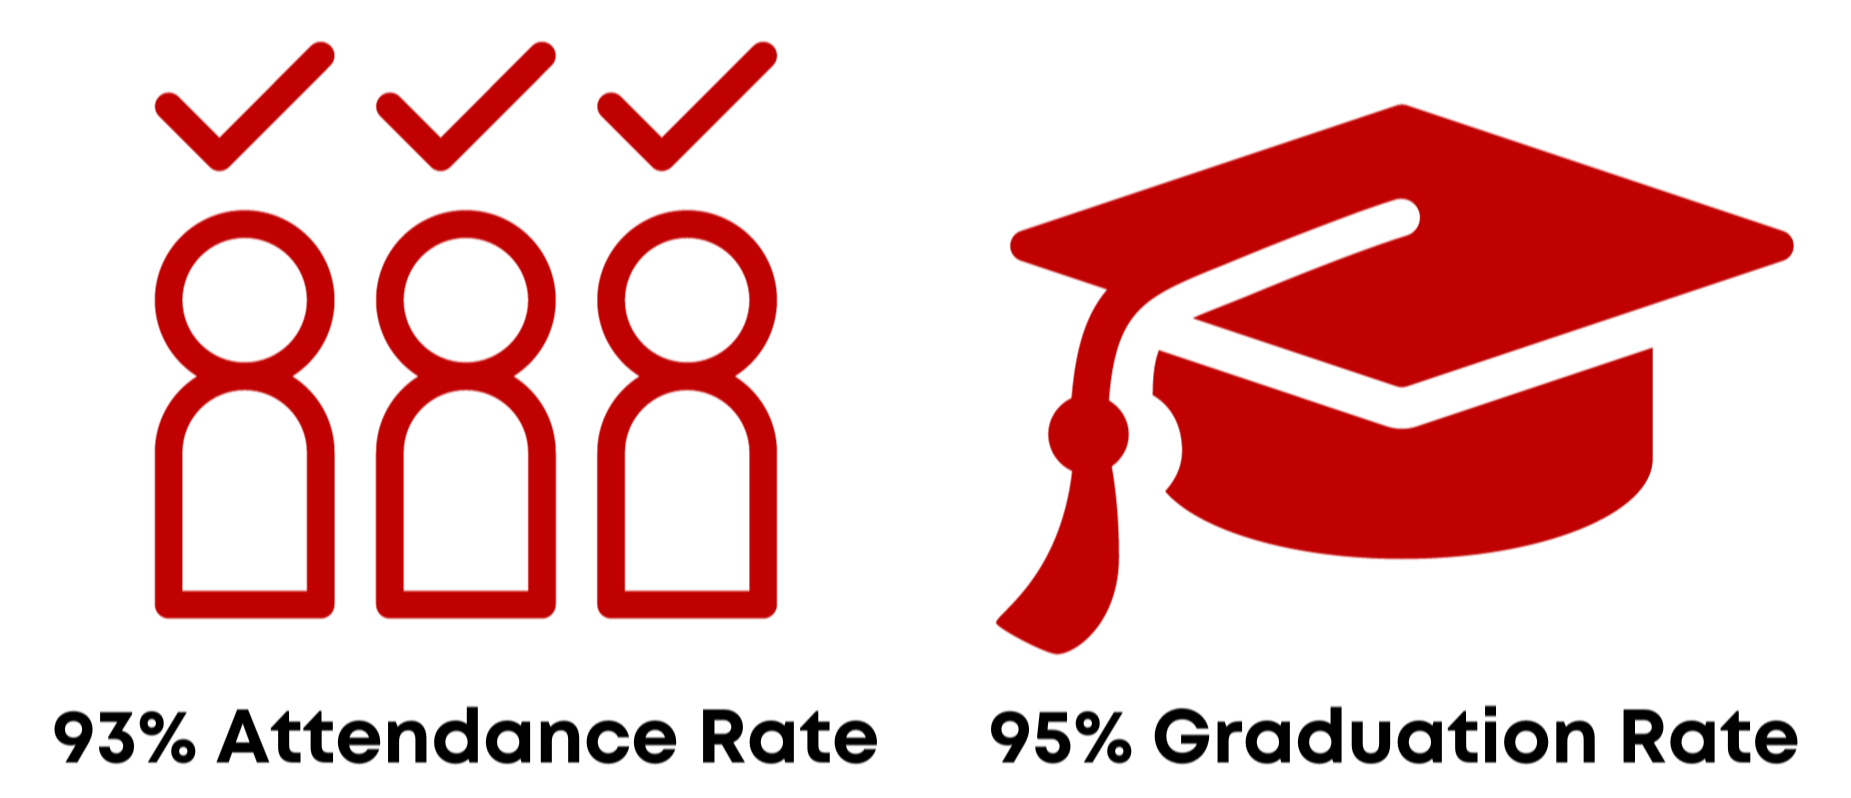 Attendance and Graduation Rates